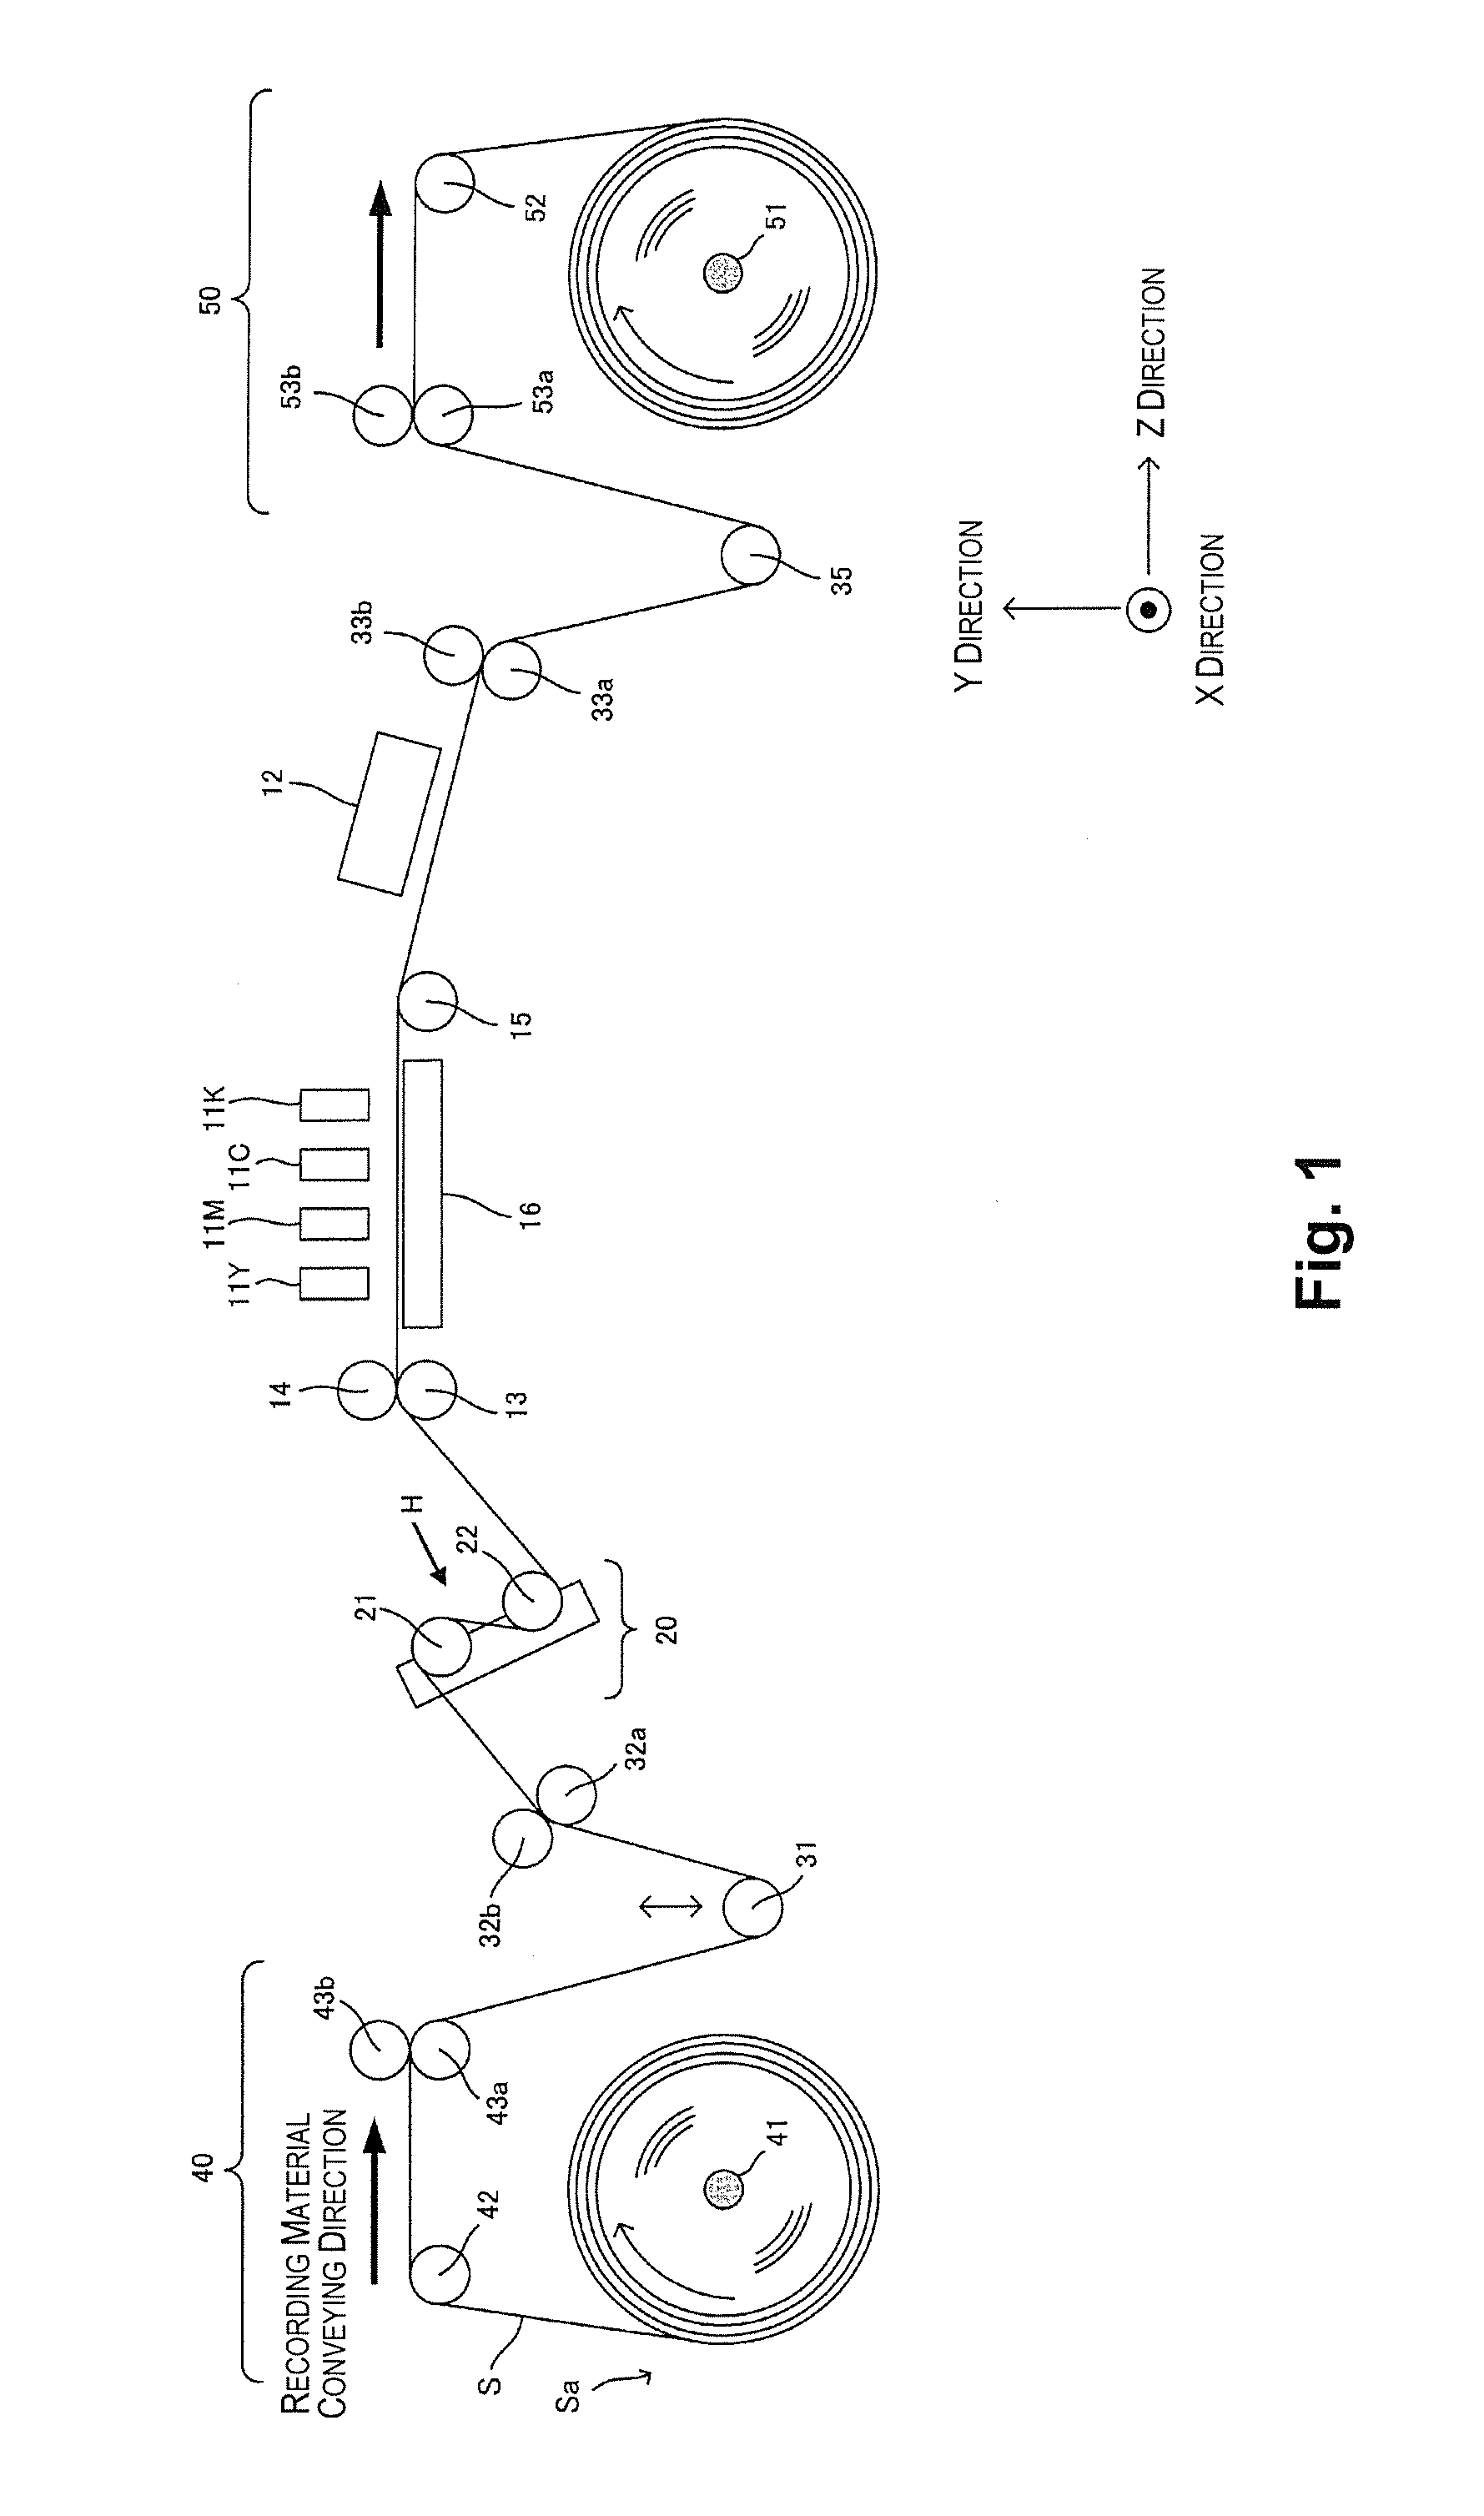 Image-forming device and method for forming an image